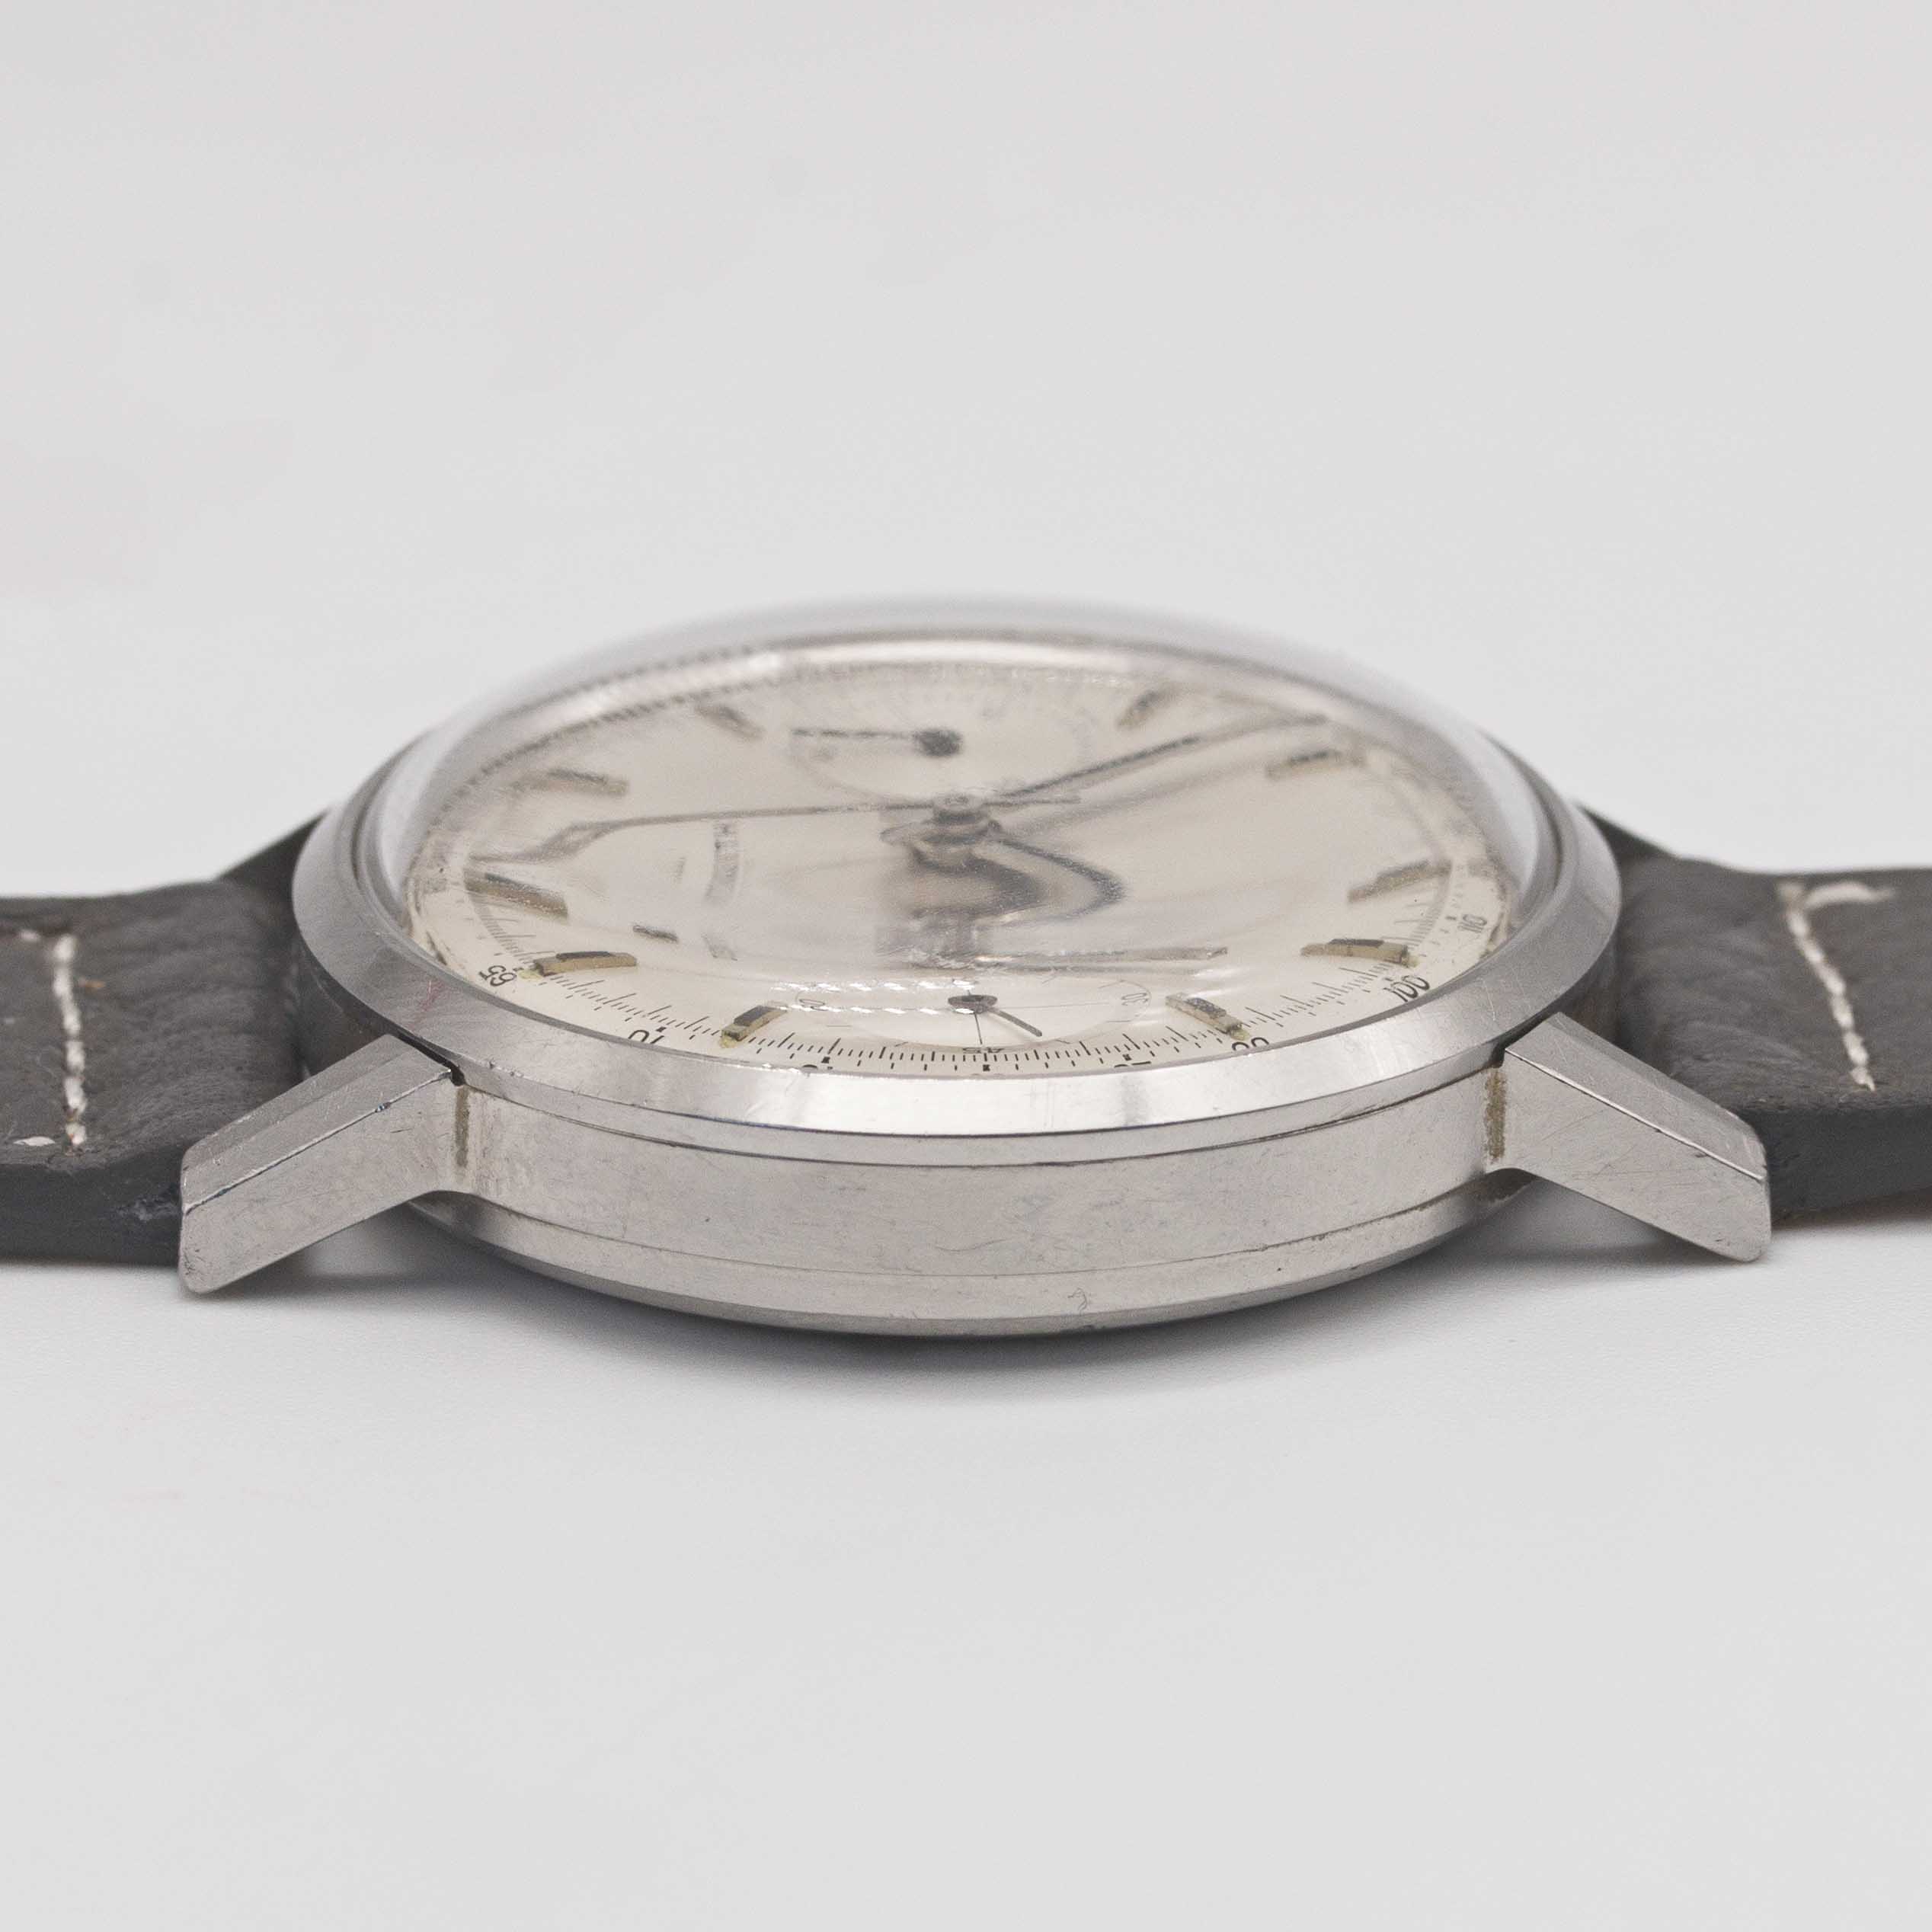 A GENTLEMAN'S STAINLESS STEEL ZENITH CHRONOGRAPH WRIST WATCH CIRCA 1960s, REF. A271  Movement: - Image 9 of 9